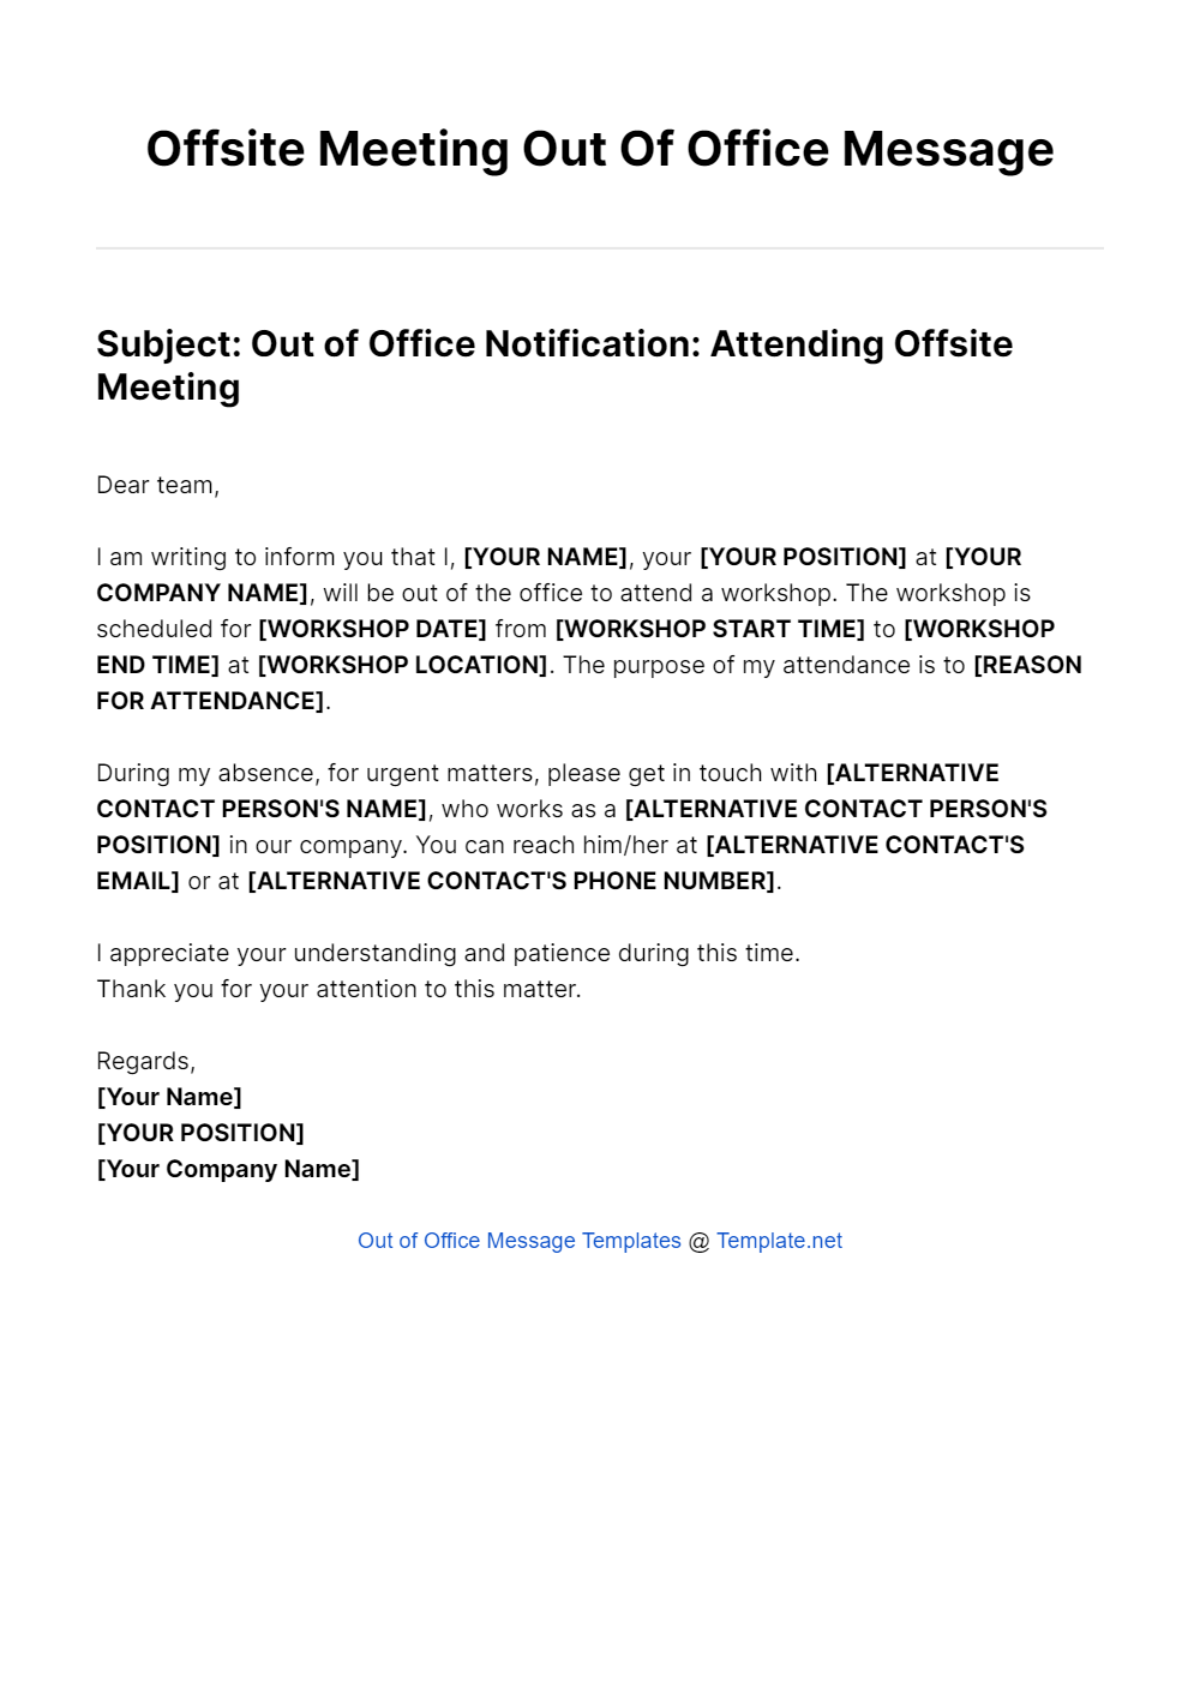 Offsite Meeting Out Of Office Message Template